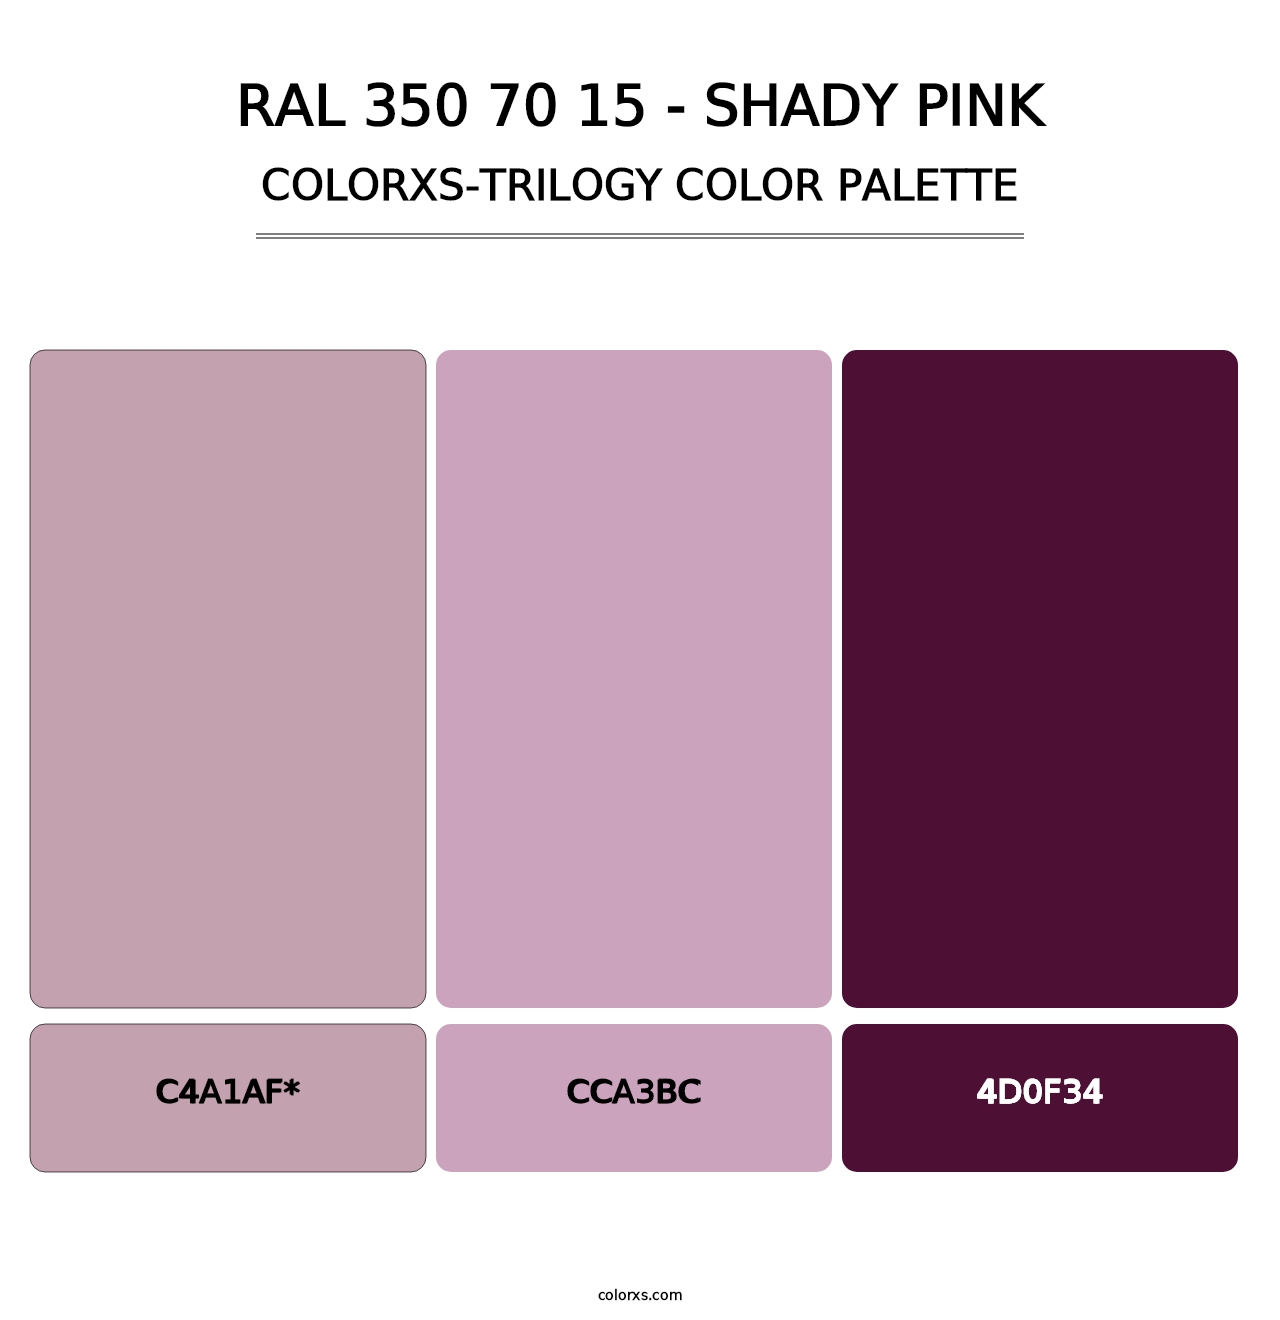 RAL 350 70 15 - Shady Pink - Colorxs Trilogy Palette